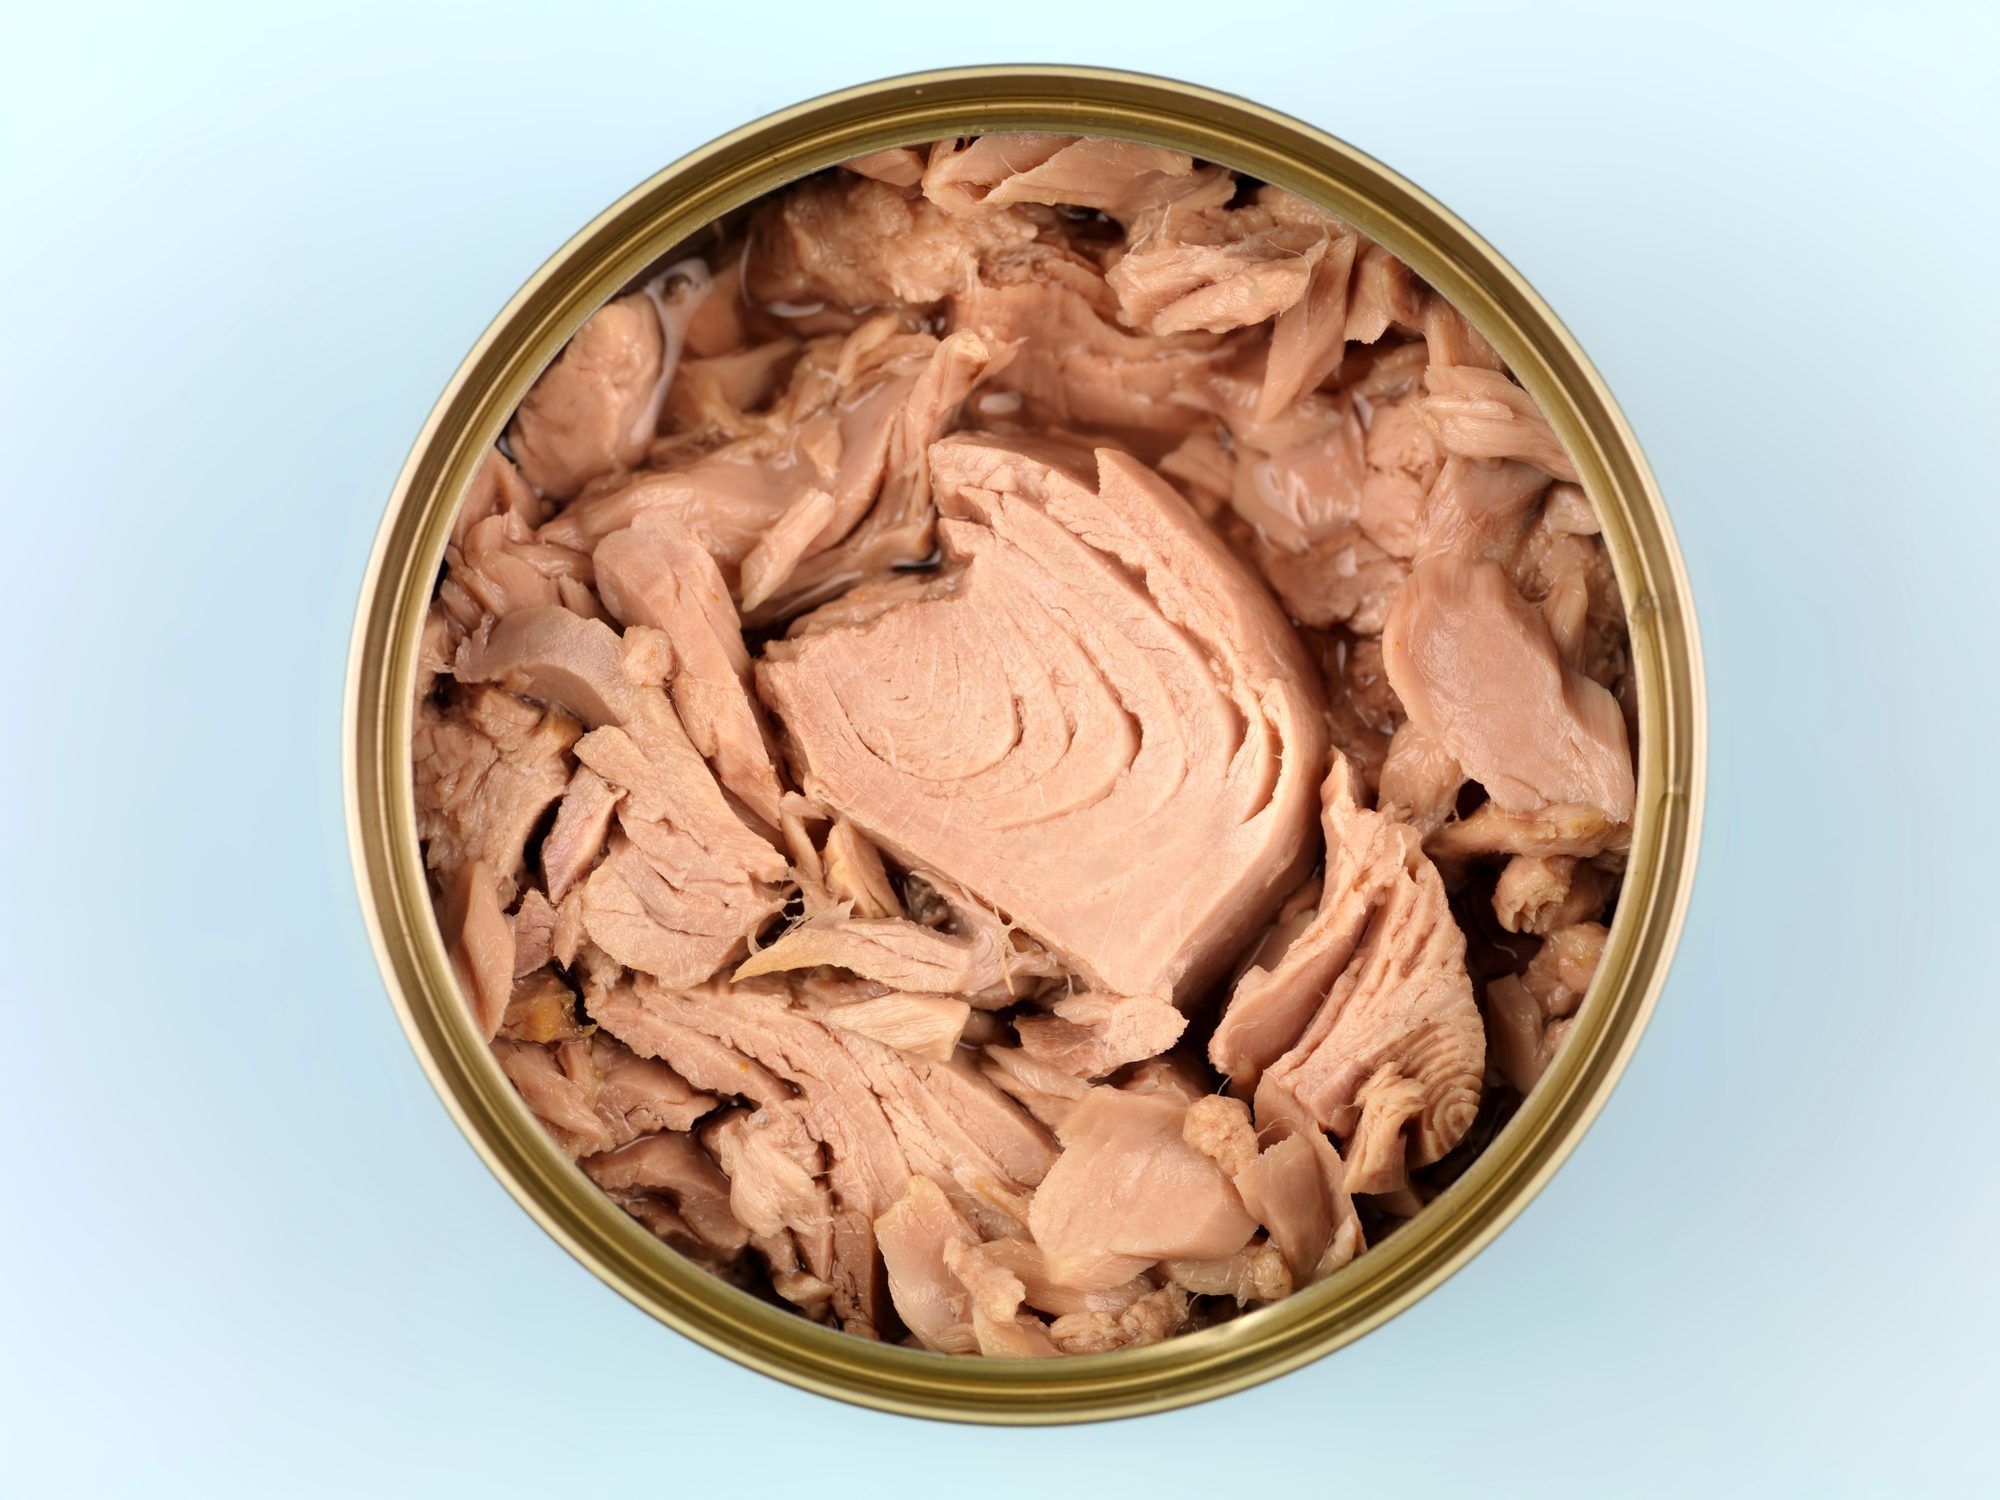 Tuna Buyers Hook Another $6.5M Deal In Chicken of the Sea Price-Fixing Class Action